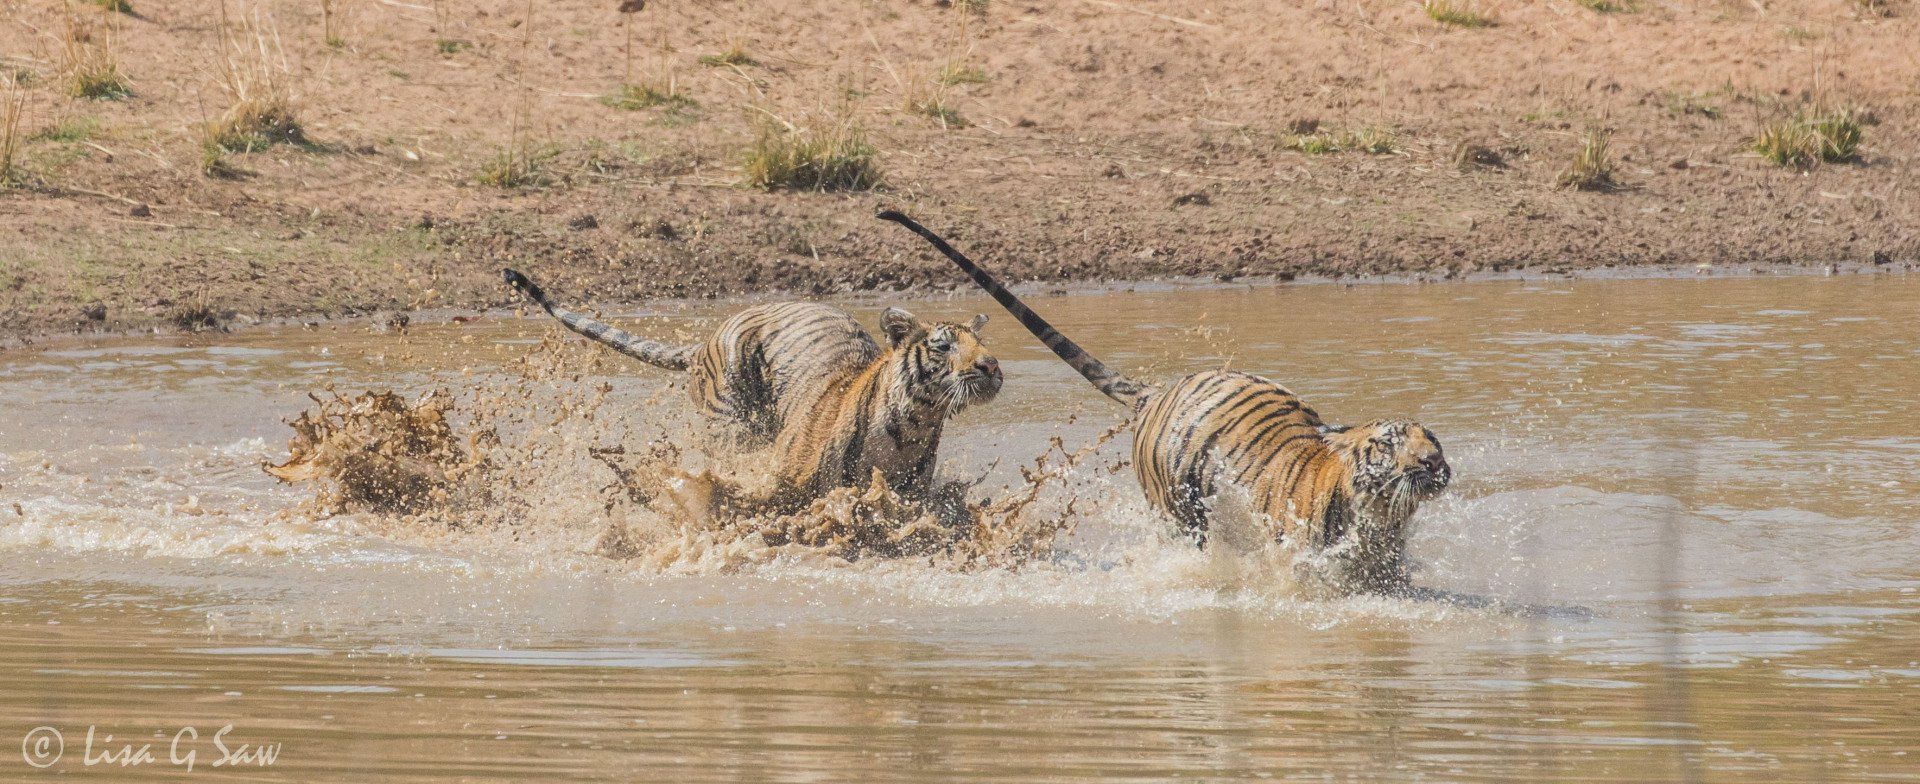 Young tiger chasing another in water